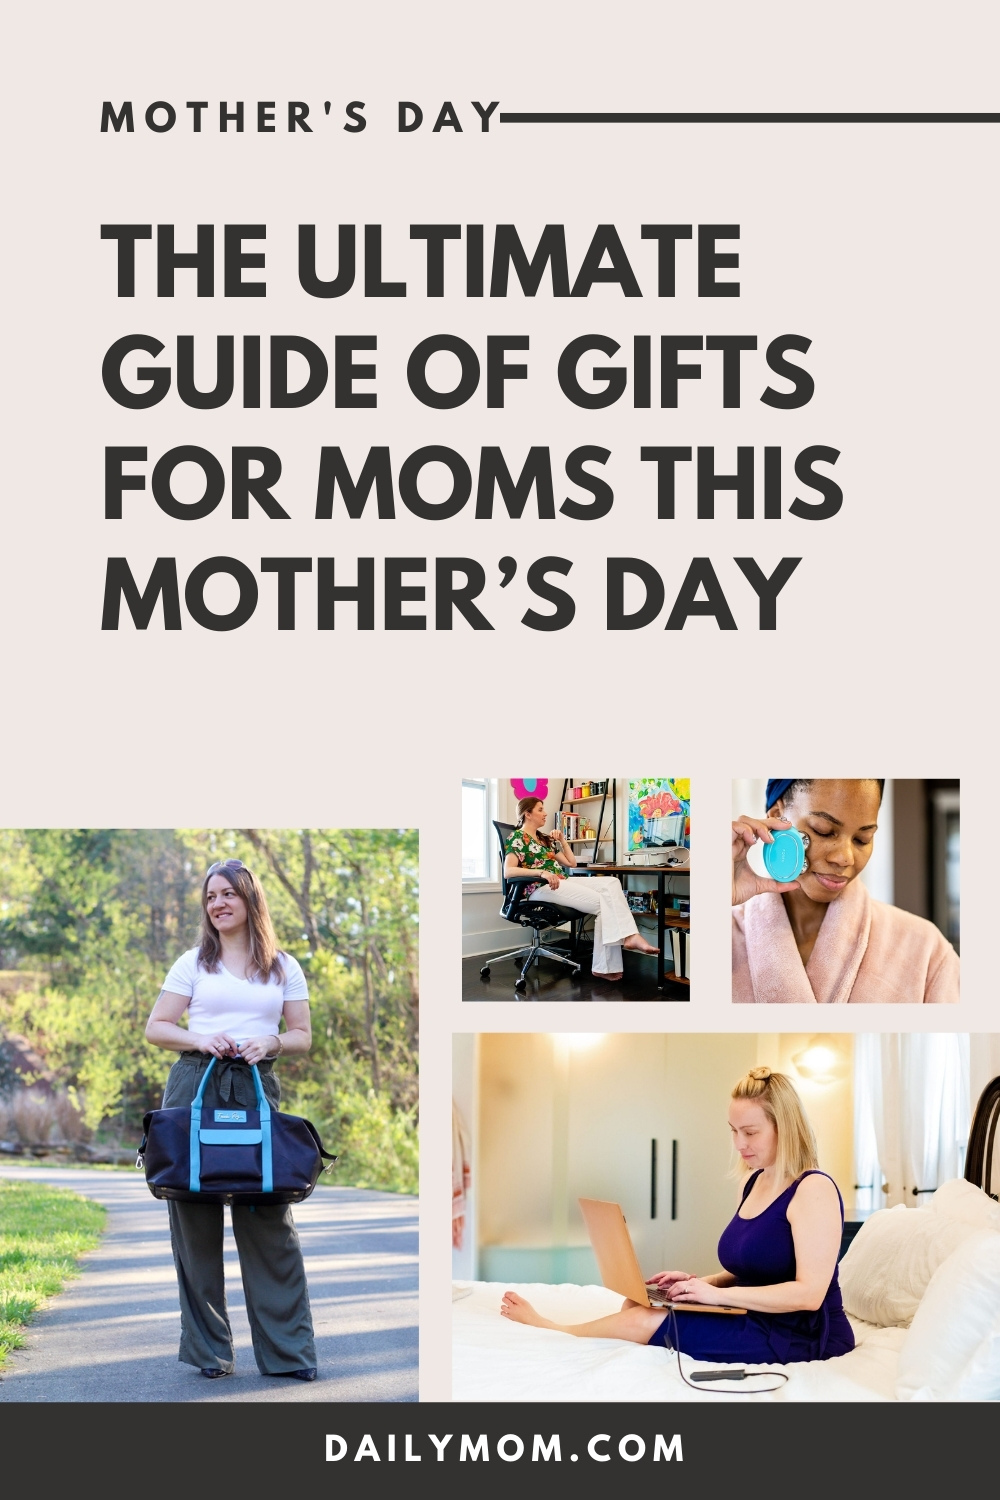 The Ultimate Guide Of 22 Gifts For Moms This Mother’s Day